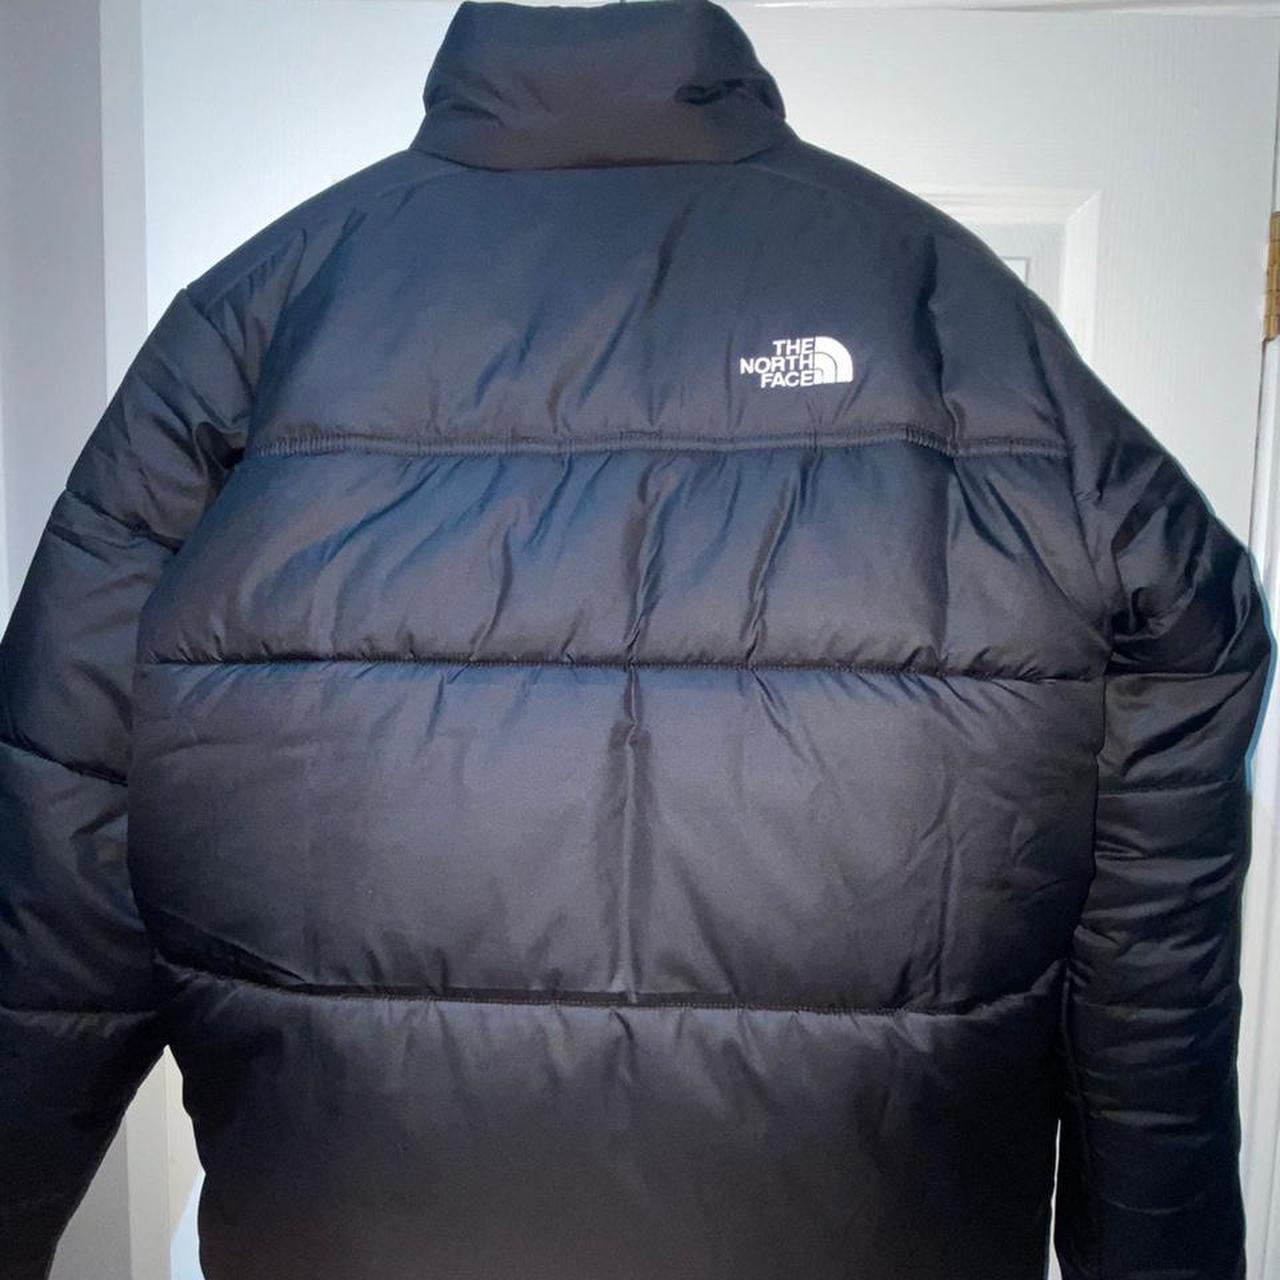 The North Face Men's Black and White Jacket | Depop